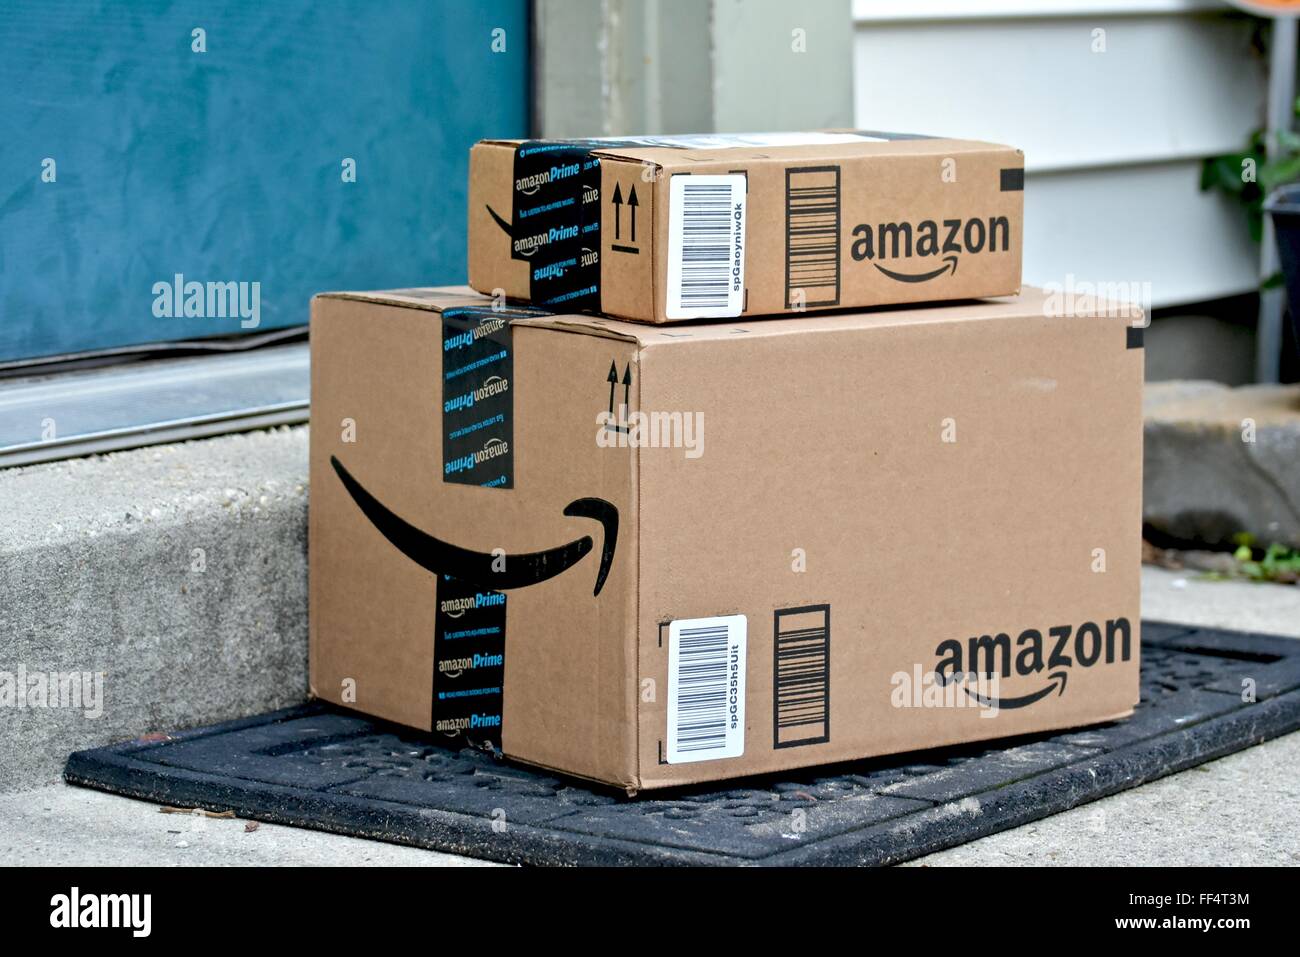 Amazon boxes delivered to a home Stock Photo